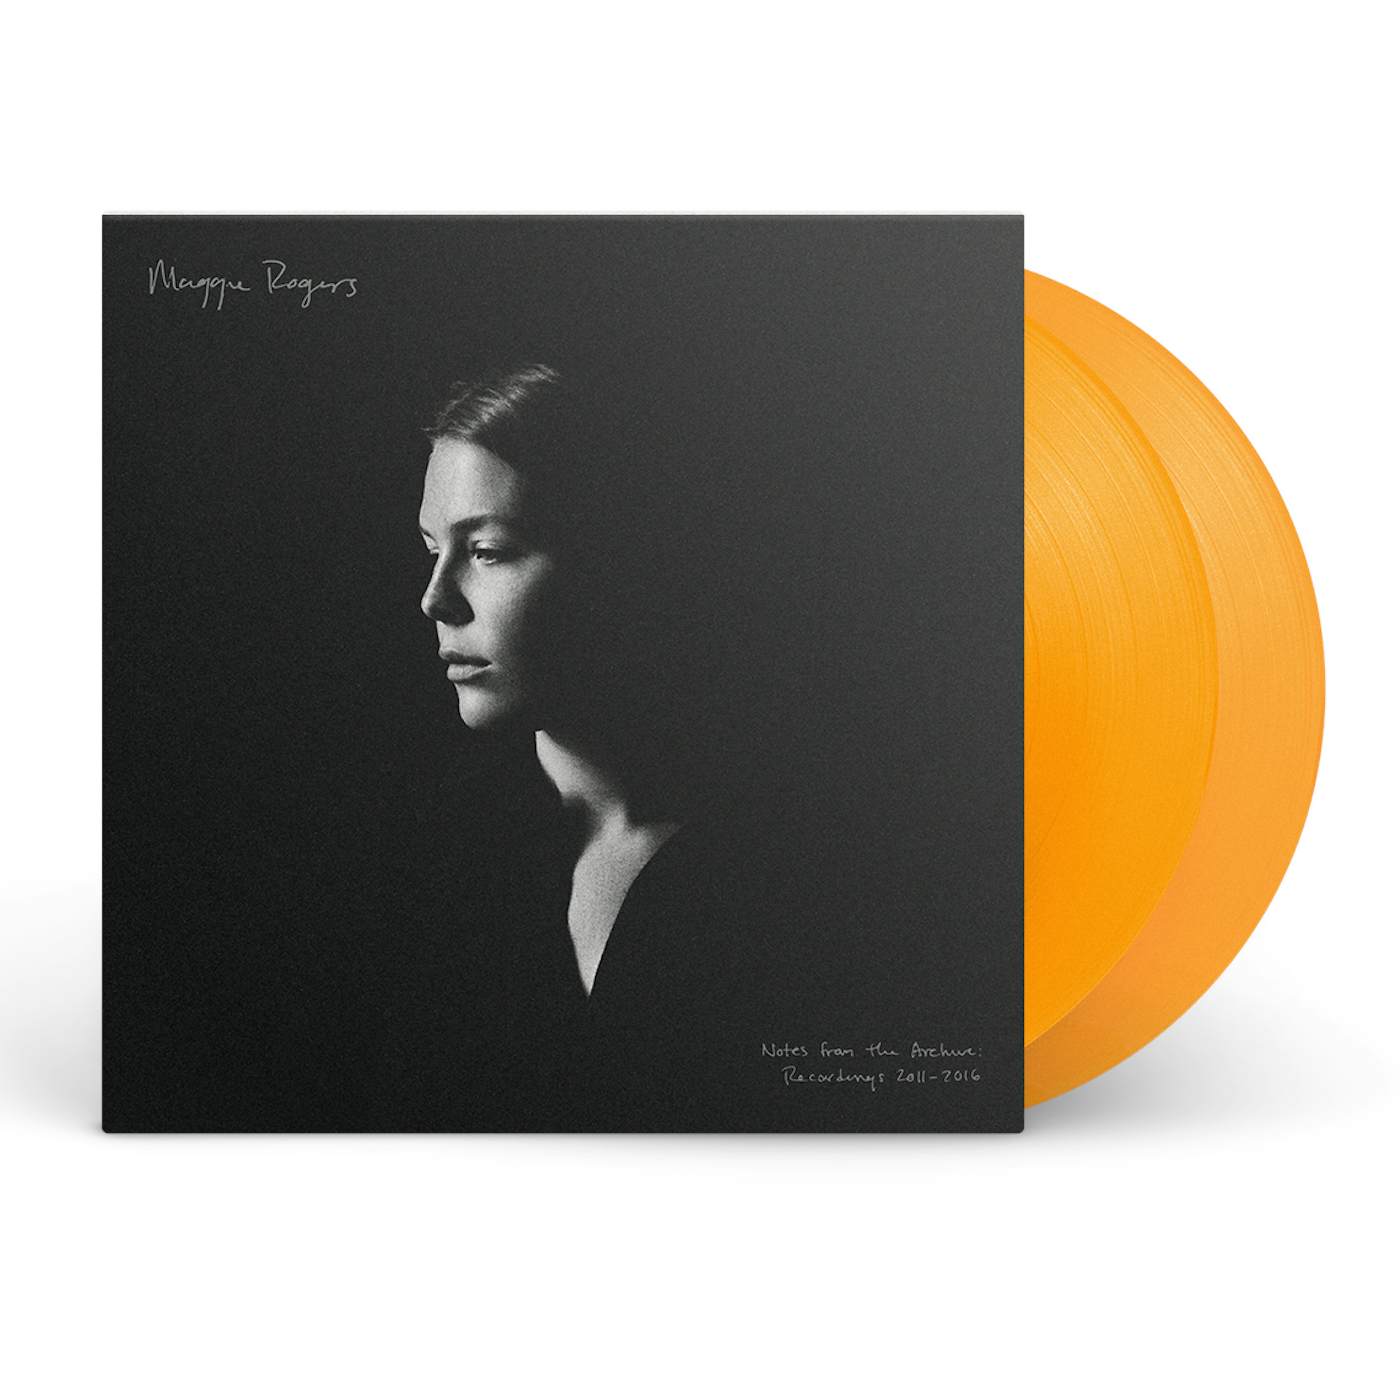 Maggie Rogers Notes from the Archive: Recordings 2011-2016 2x12" Vinyl (Marigold)